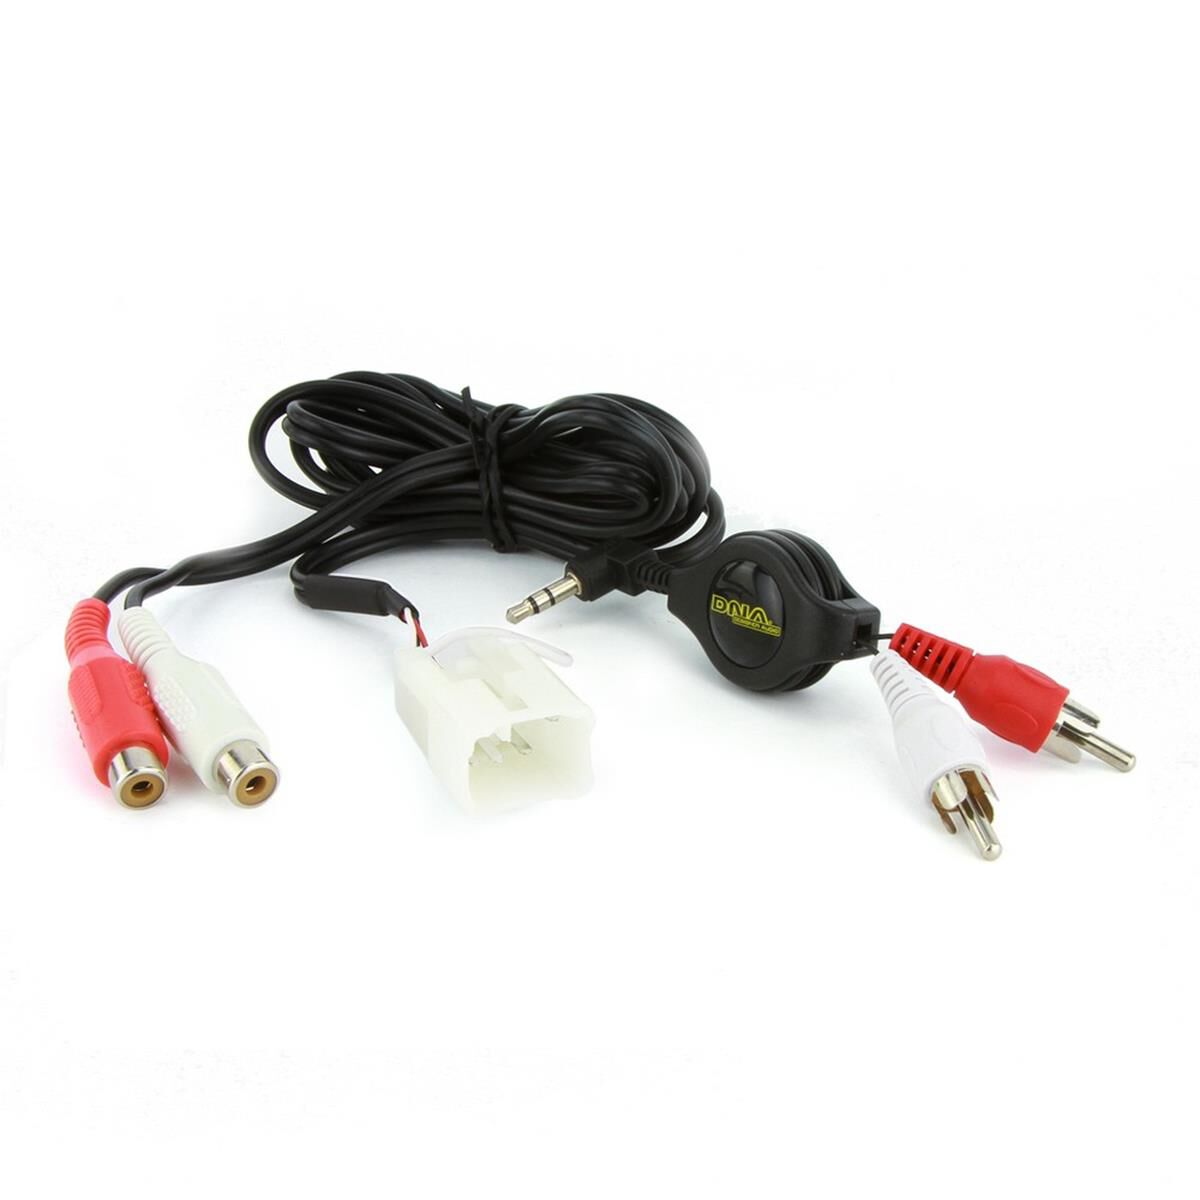 DNA Aux Cable Ba Ford Falcon/Territory (W/Rca To 3.5Mm Adaptor ...